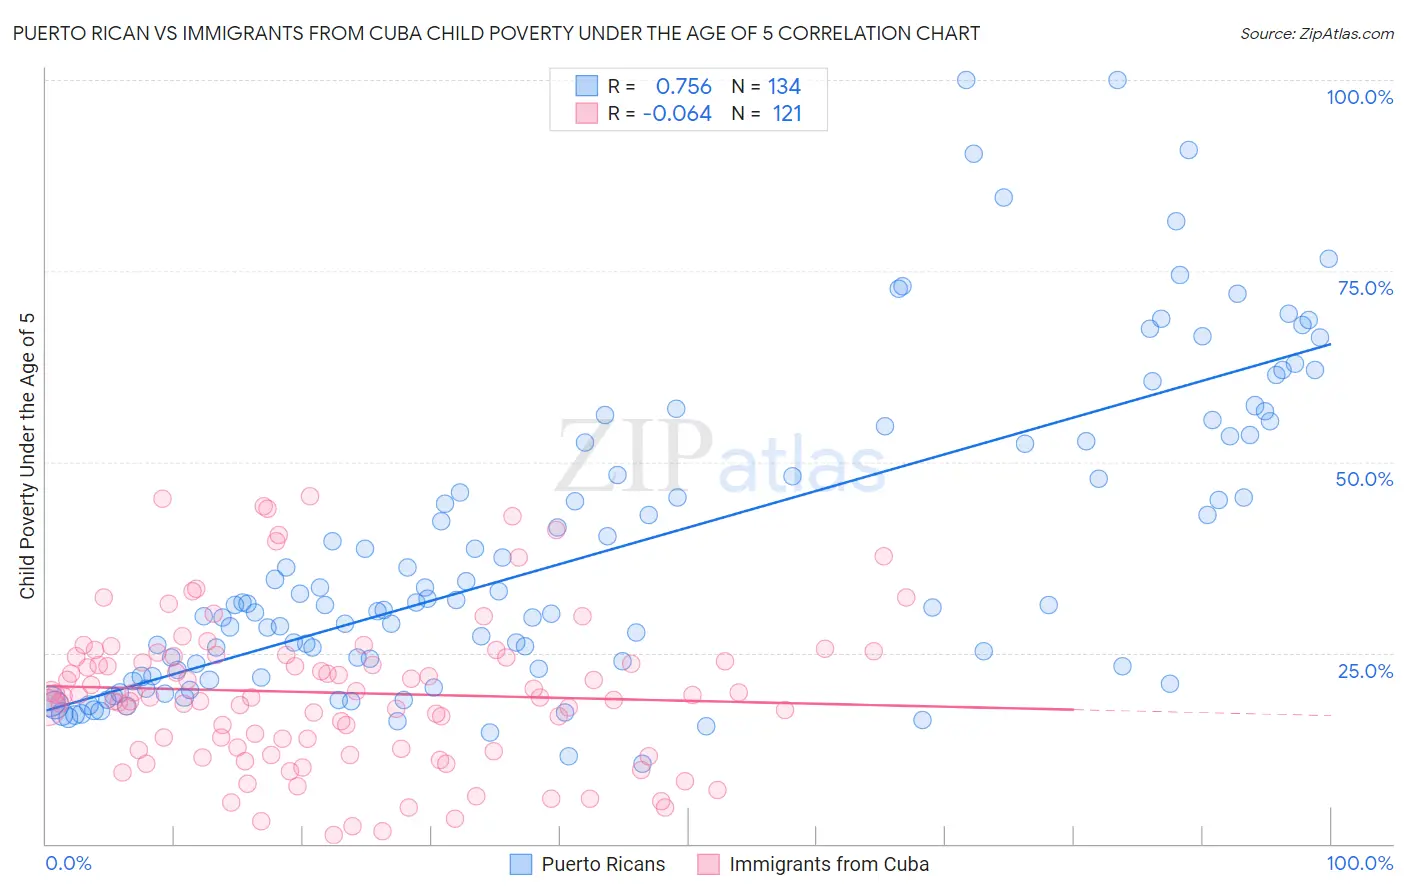 Puerto Rican vs Immigrants from Cuba Child Poverty Under the Age of 5